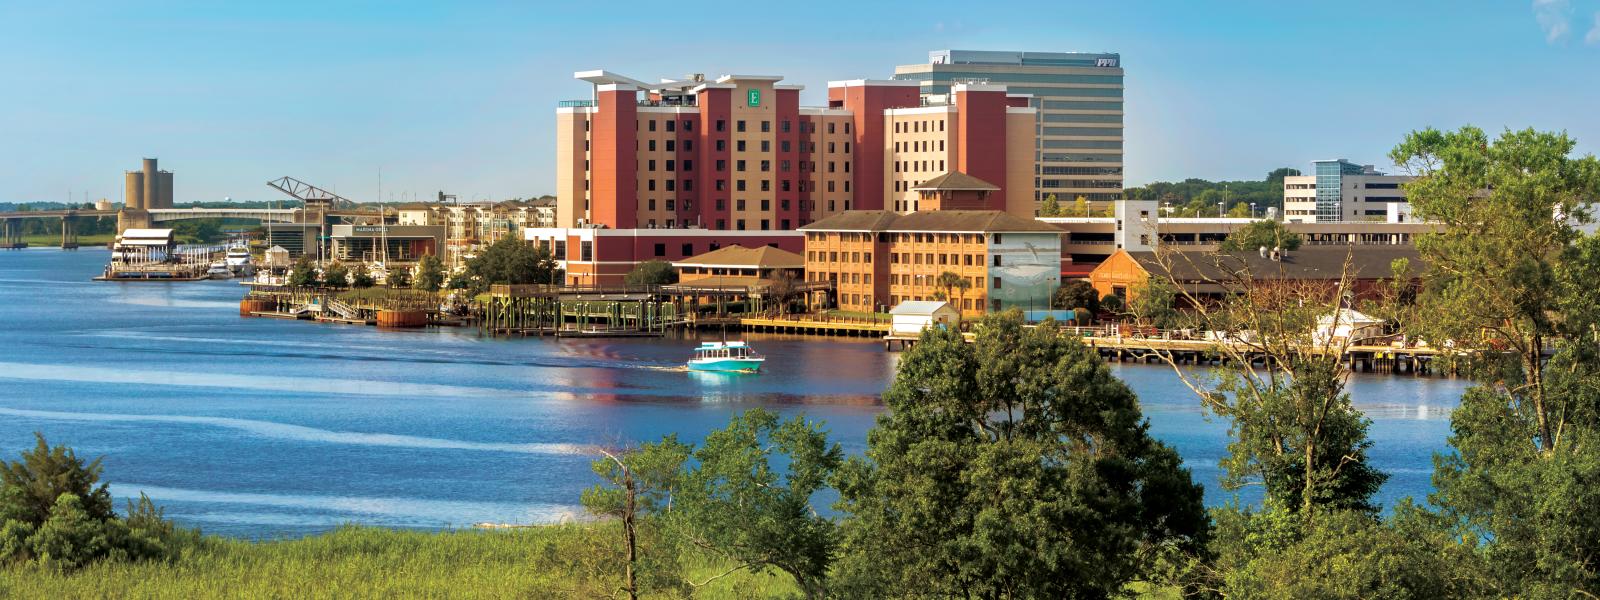 Find Adventure and Wellness on a Spring Escape to Wilmington